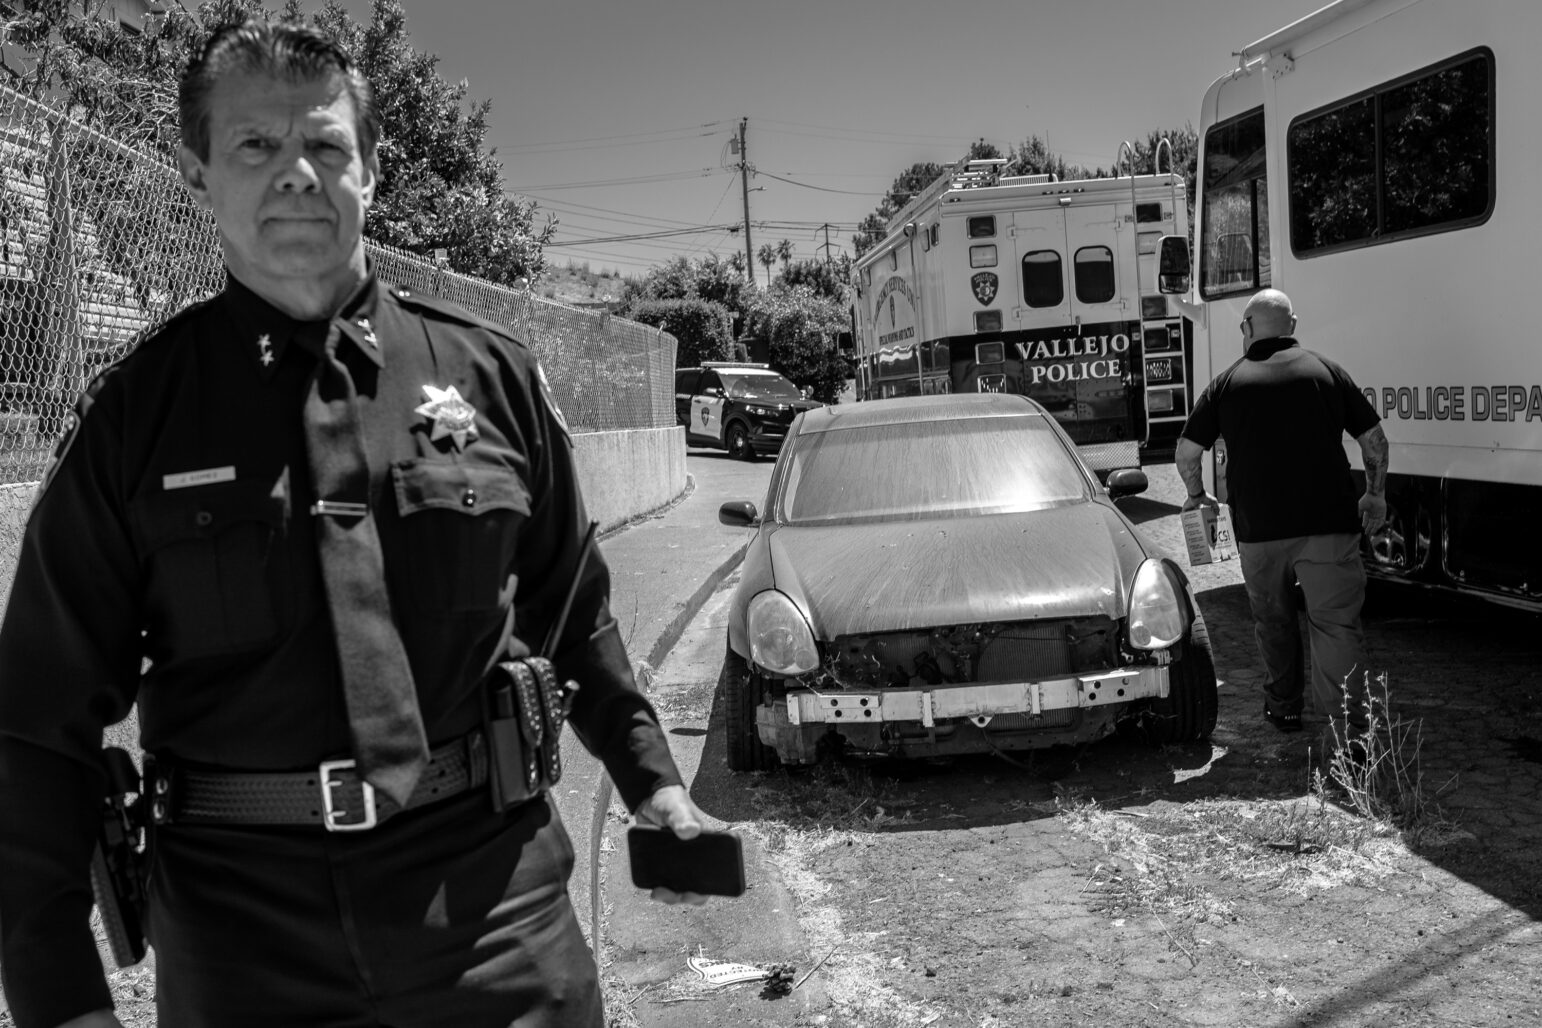 A monochrome image capturing a serious-looking man in a police uniform standing outside on a sunny day. His badge and name tag are visible, and he appears to be holding a cellphone in his left hand. In the background, a dilapidated car is in front of an ambulance and a police department van. There are other indistinct figures and urban details in the scene, with a chain-link fence to the left and power lines above.